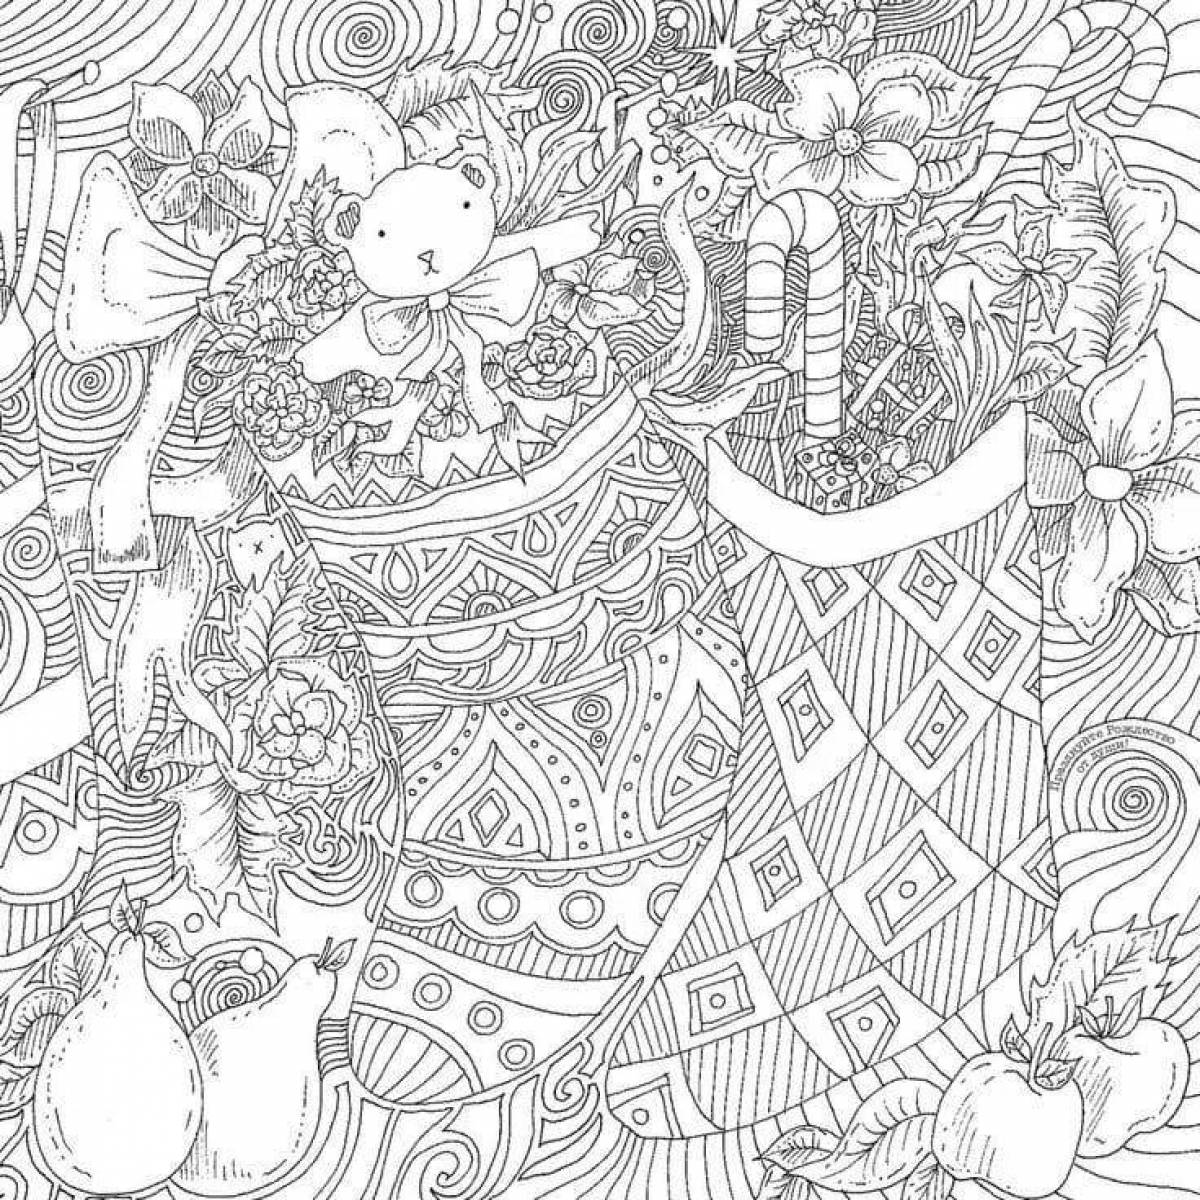 Deluxe Christmas coloring book for adults